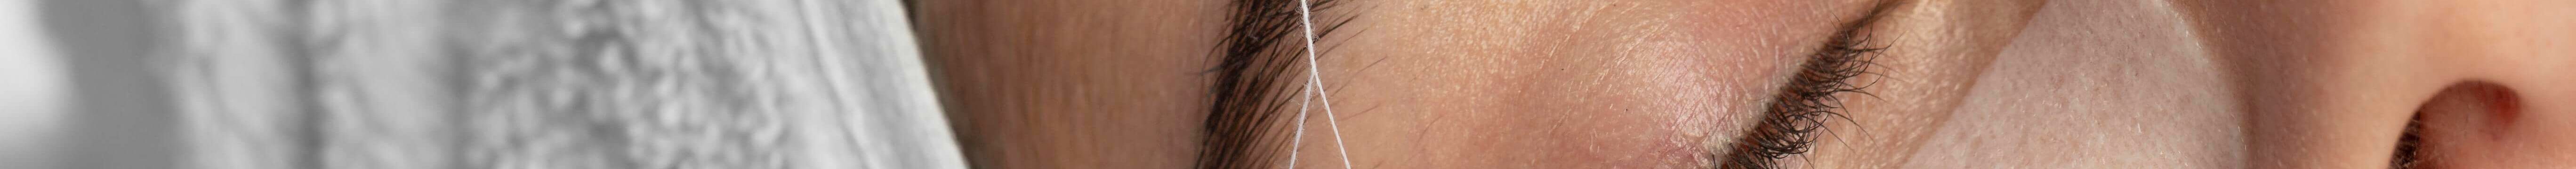 can threading cause acne